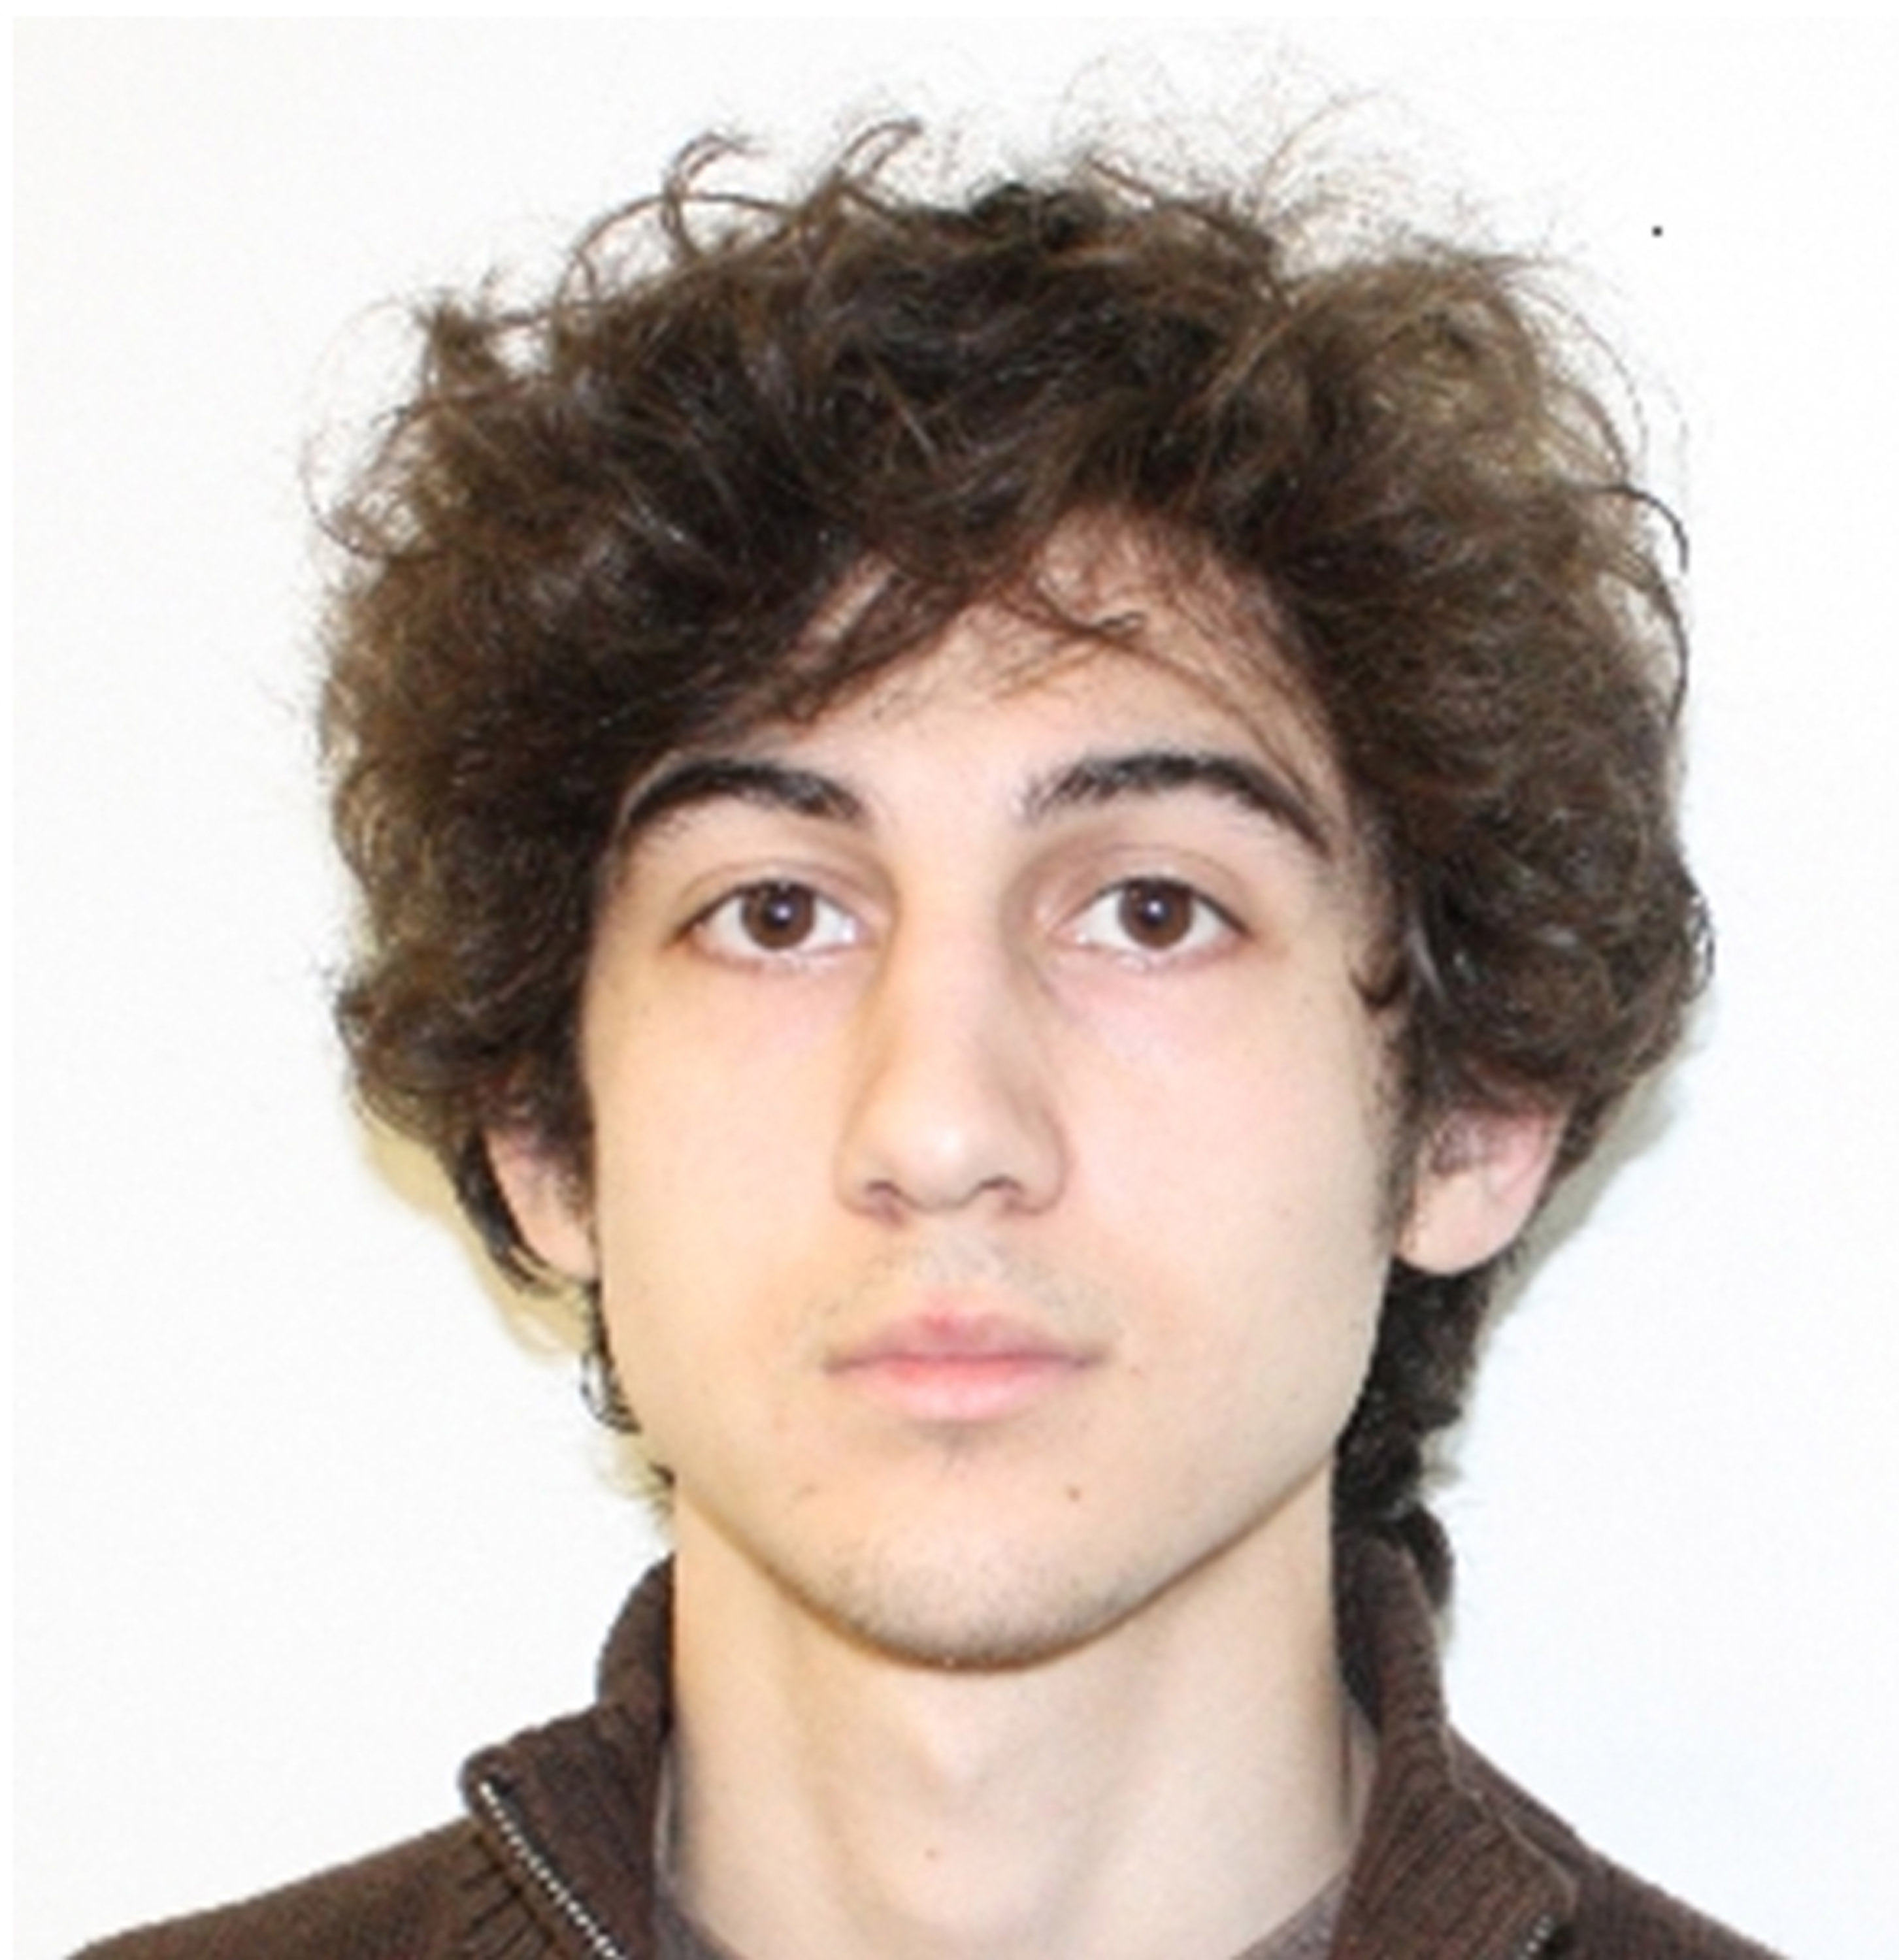 In this image released by the Federal Bureau of Investigation (FBI) on April 19, 2013, Dzhokhar Tsarnaev, 19-years-old, a suspect in the Boston Marathon bombing is seen. (Handout&mdash;Getty Images)